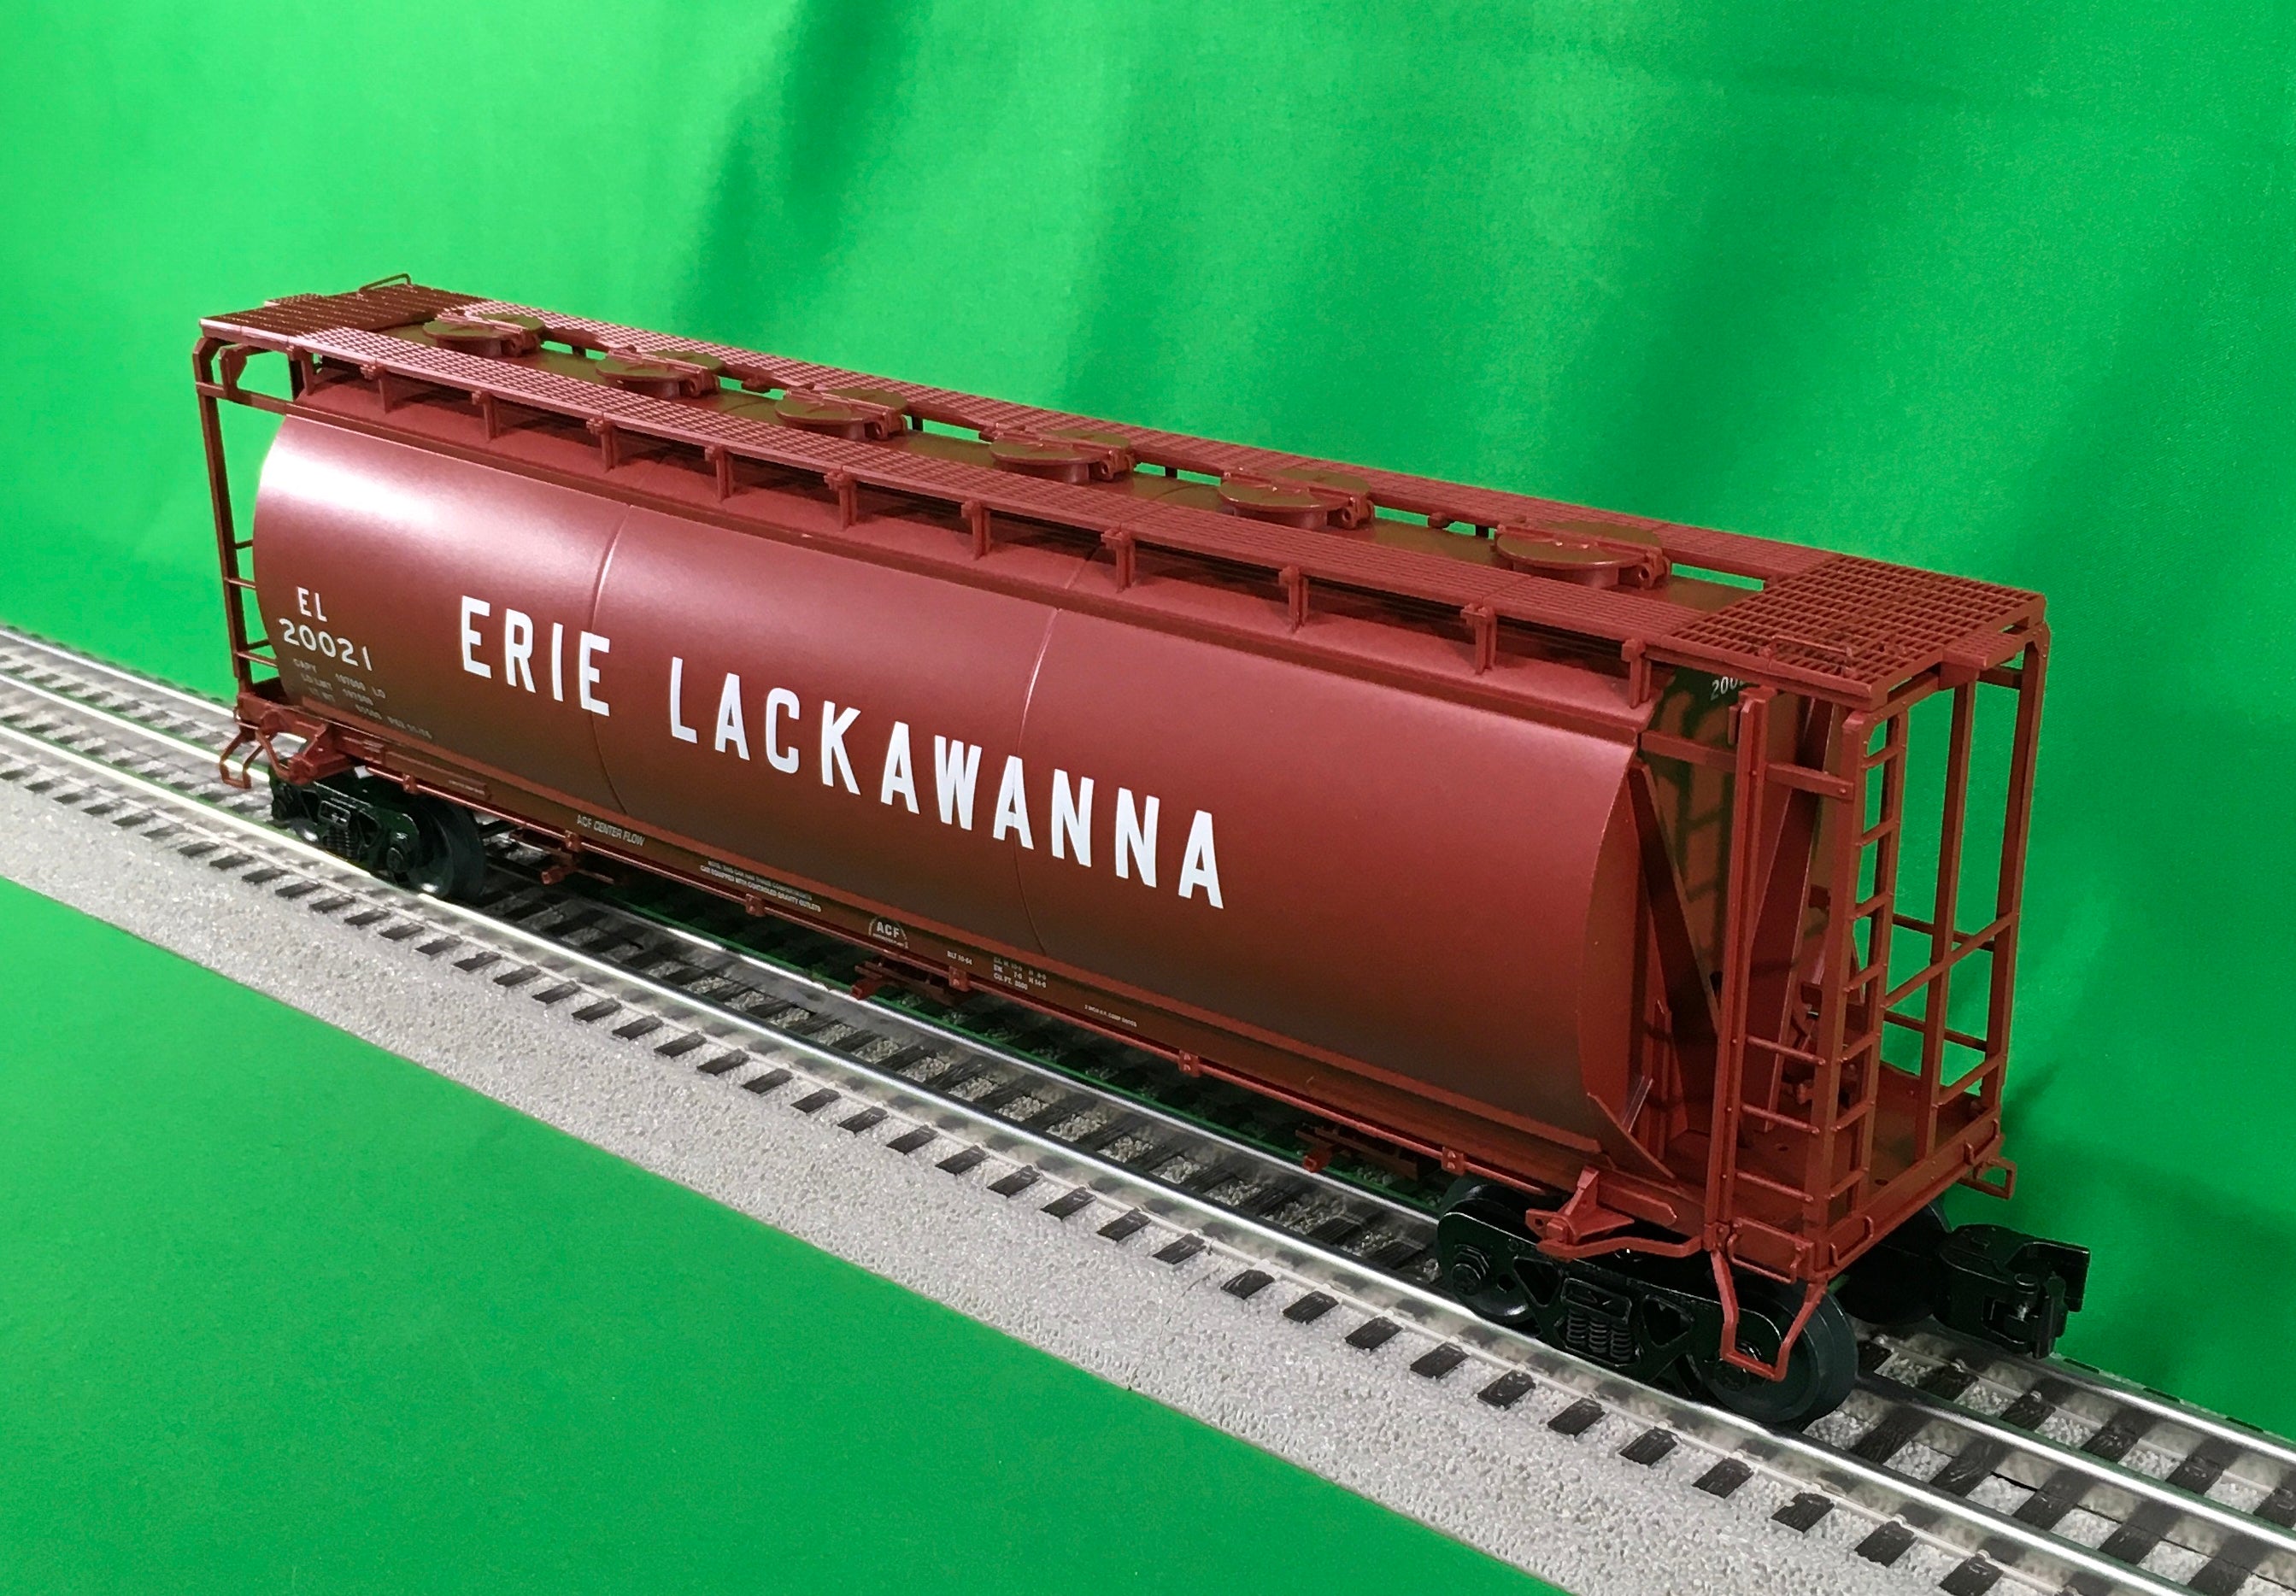 Lionel 2226110 - Cylindrical Covered Hopper Car "Erie Lackawanna" #20021